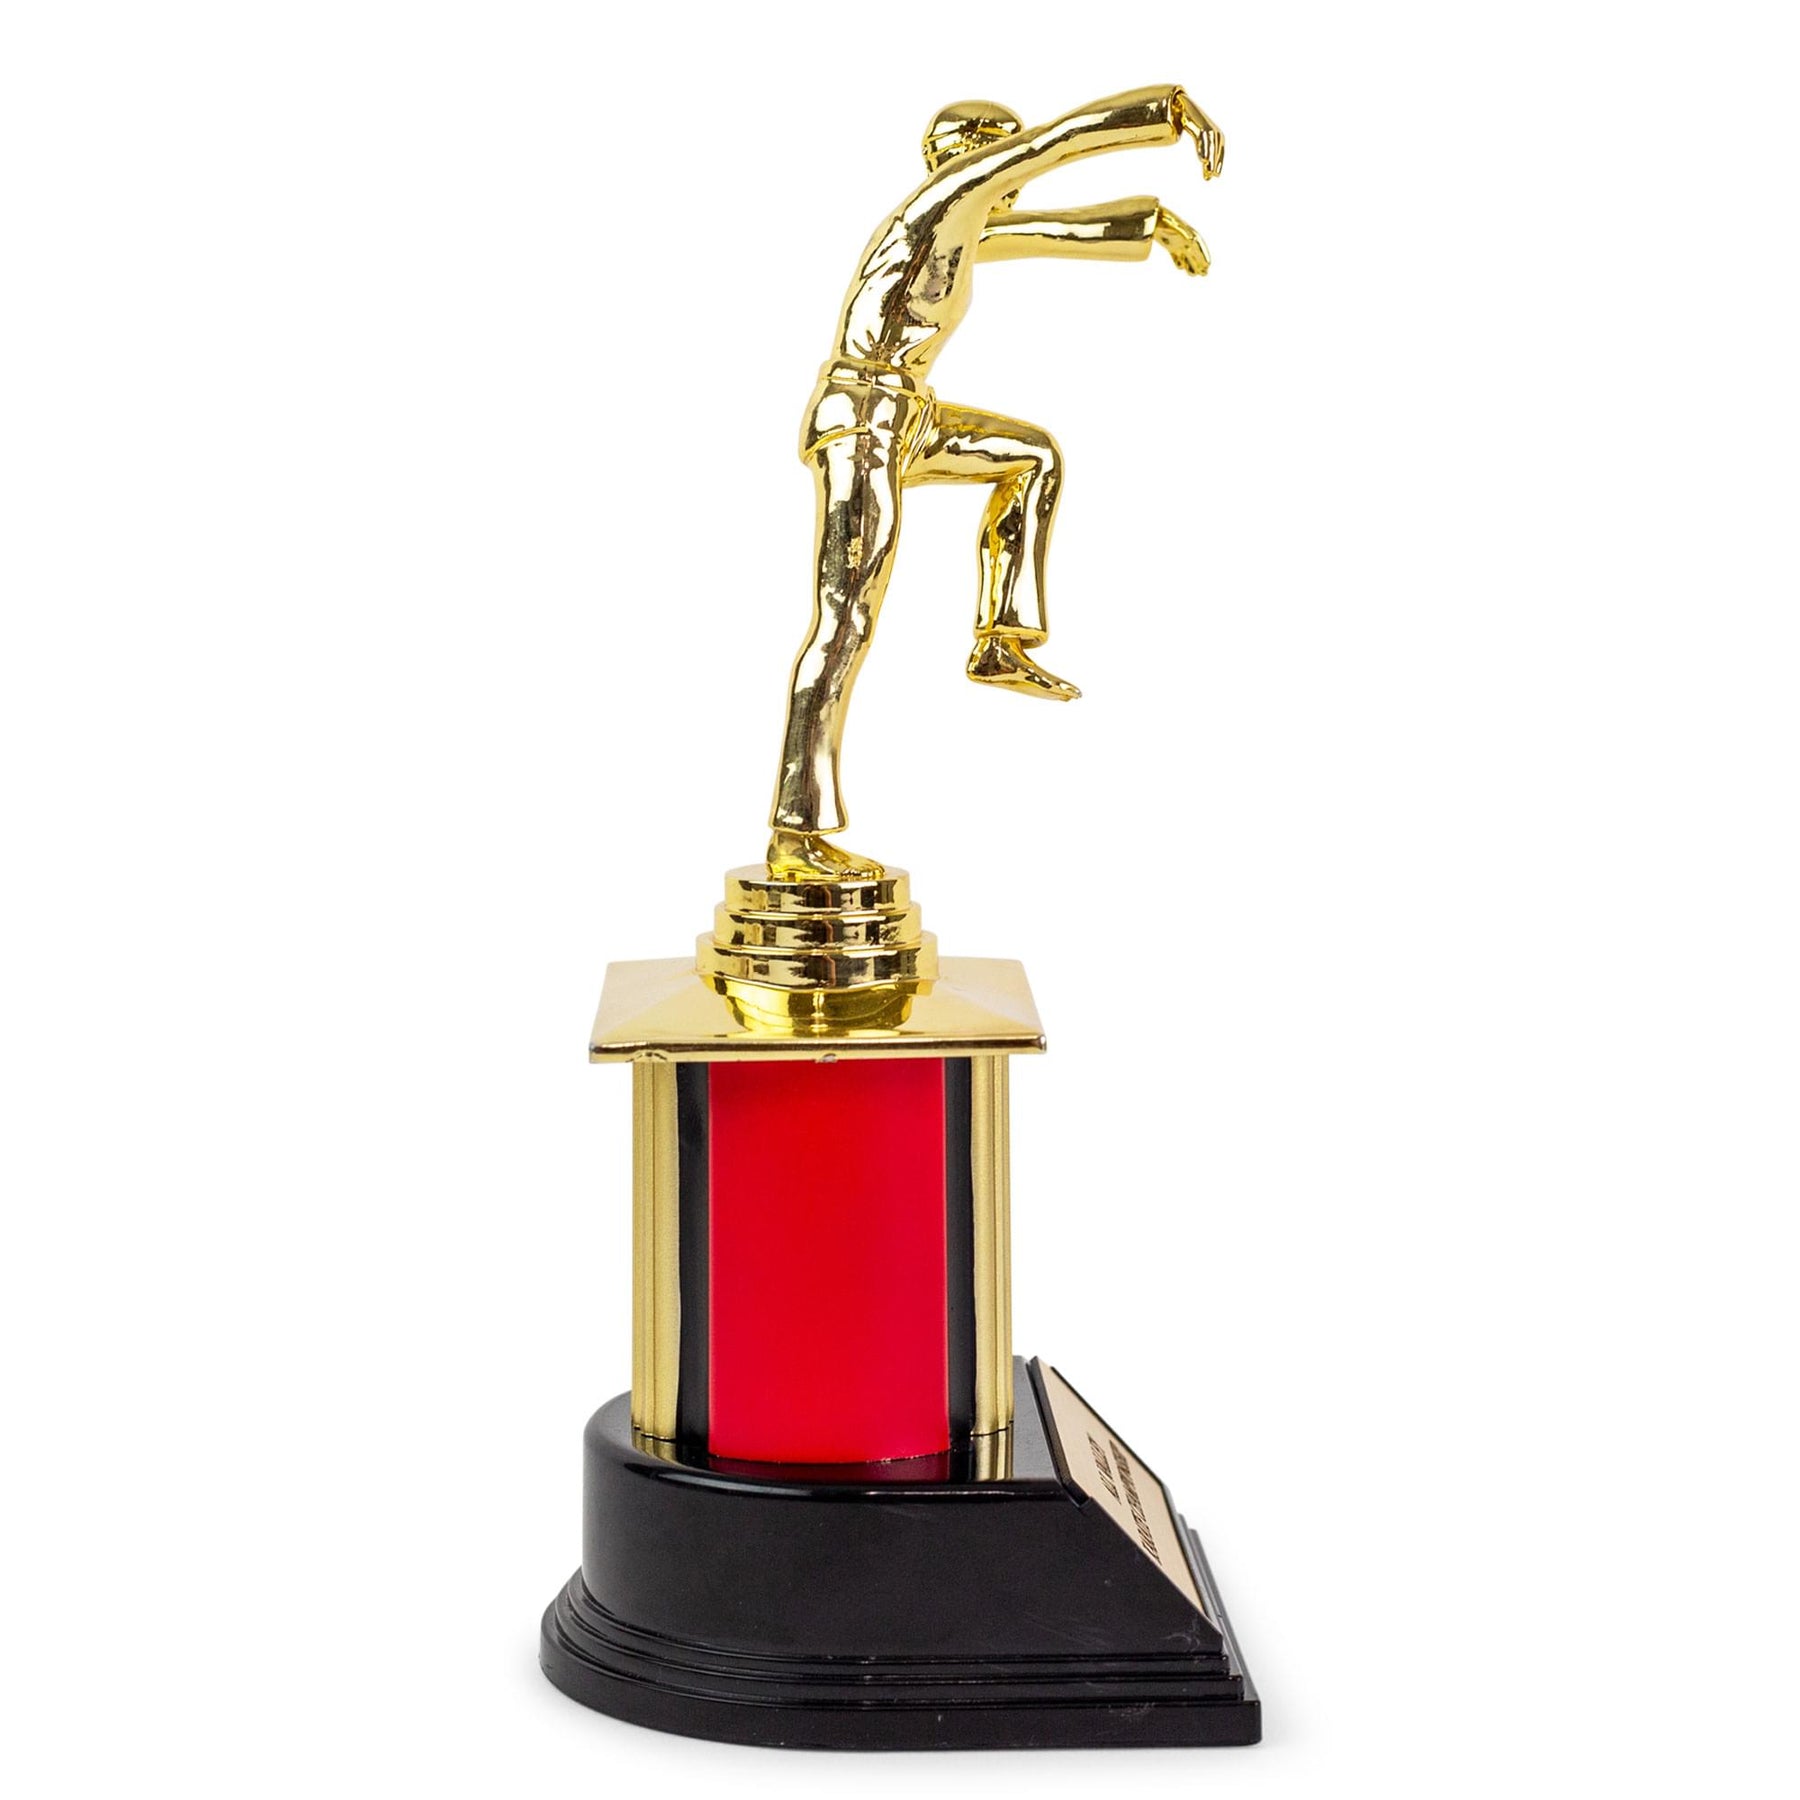 The Karate Kid 8-Inch All Valley Karate Championship Trophy Replica